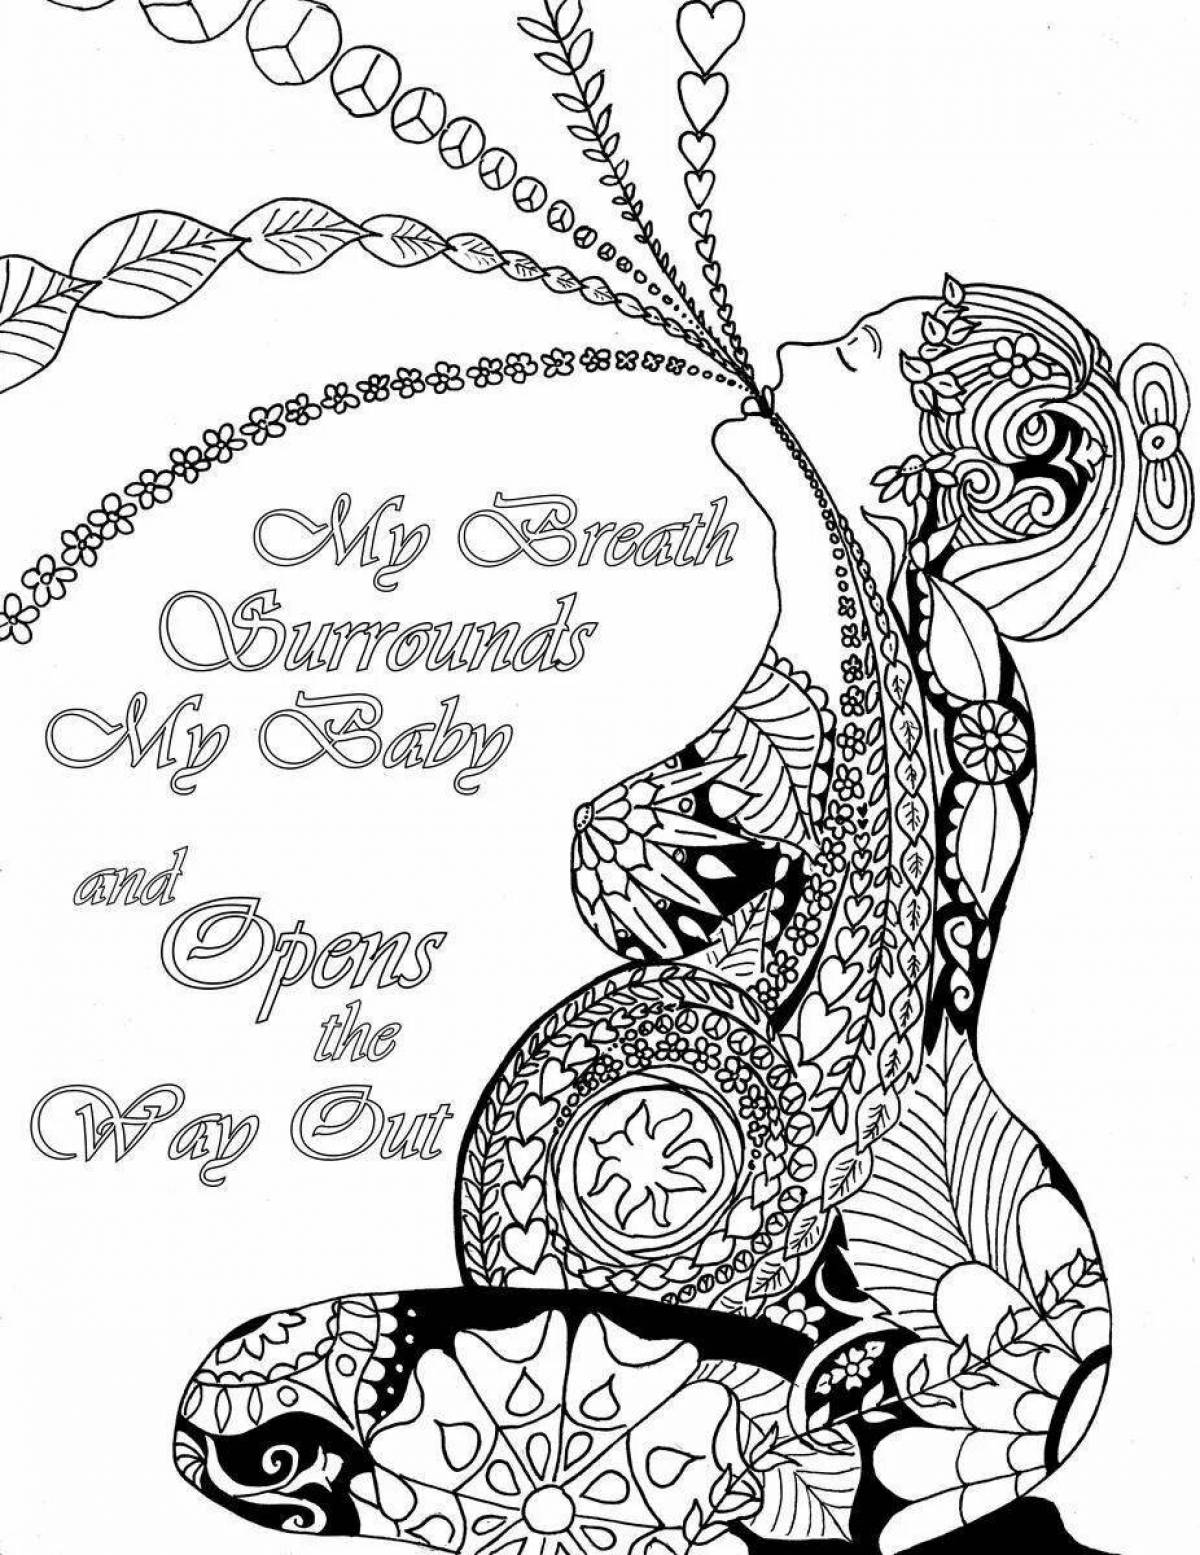 Coloring book for expectant mothers